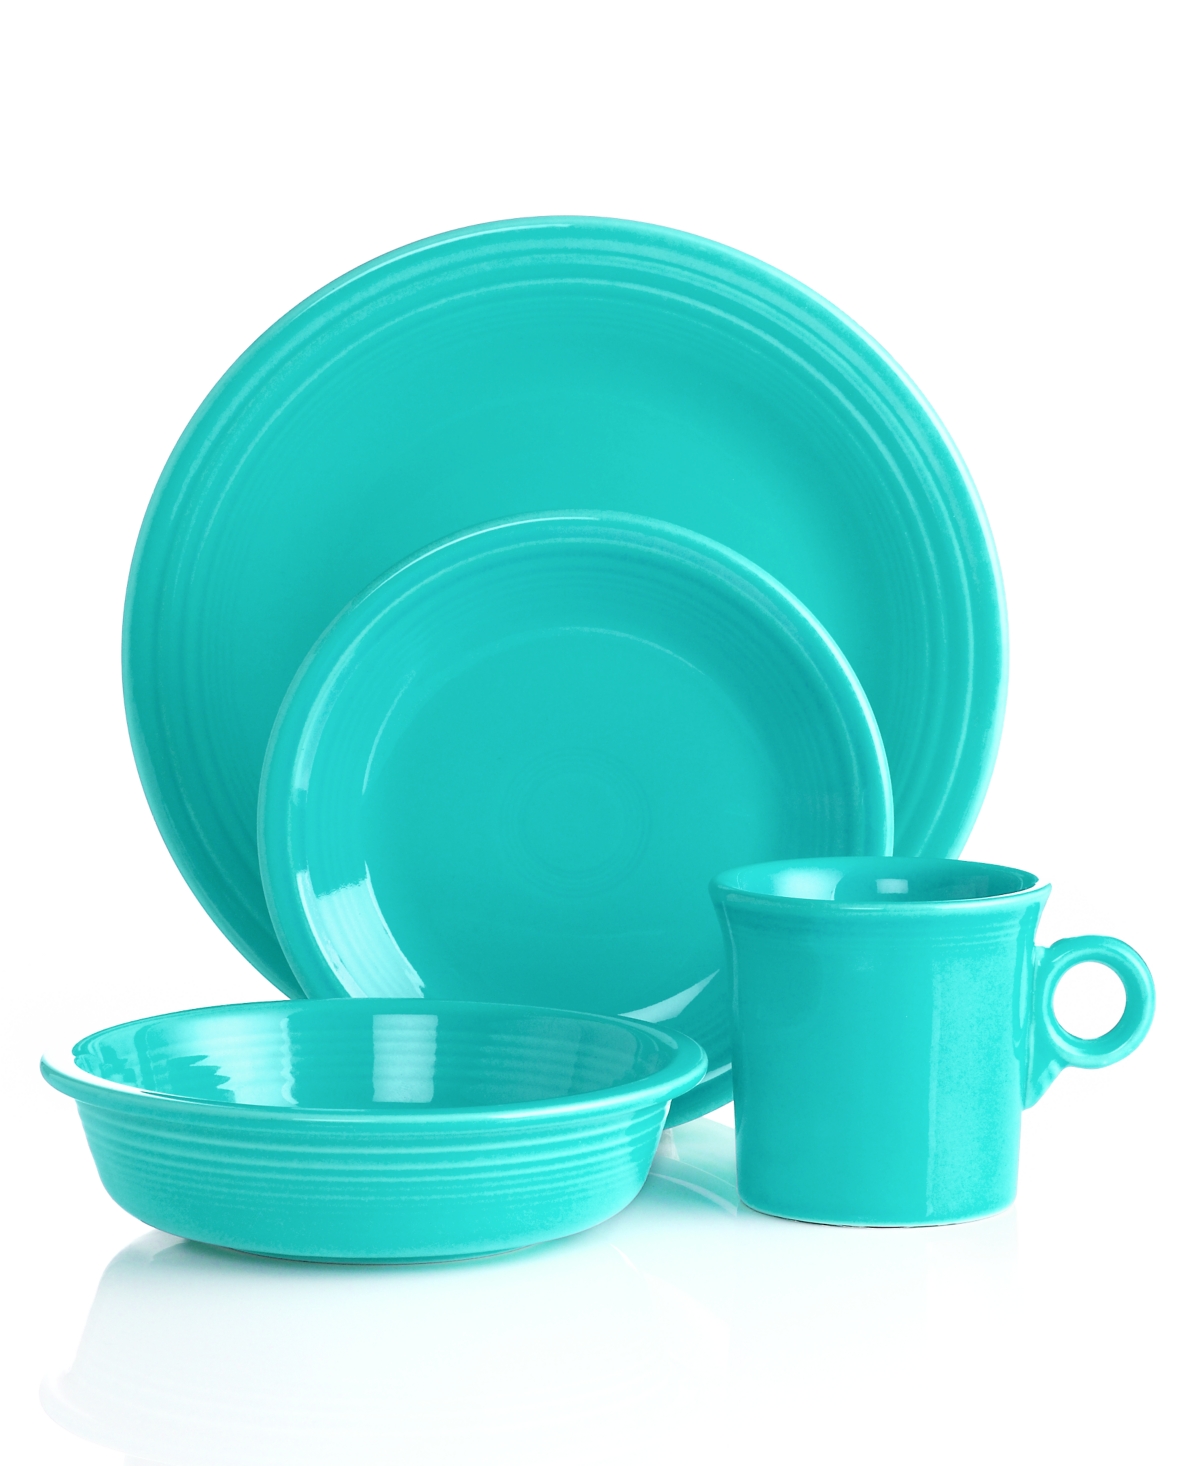 Fiesta 4-piece Place Setting In Turquoise